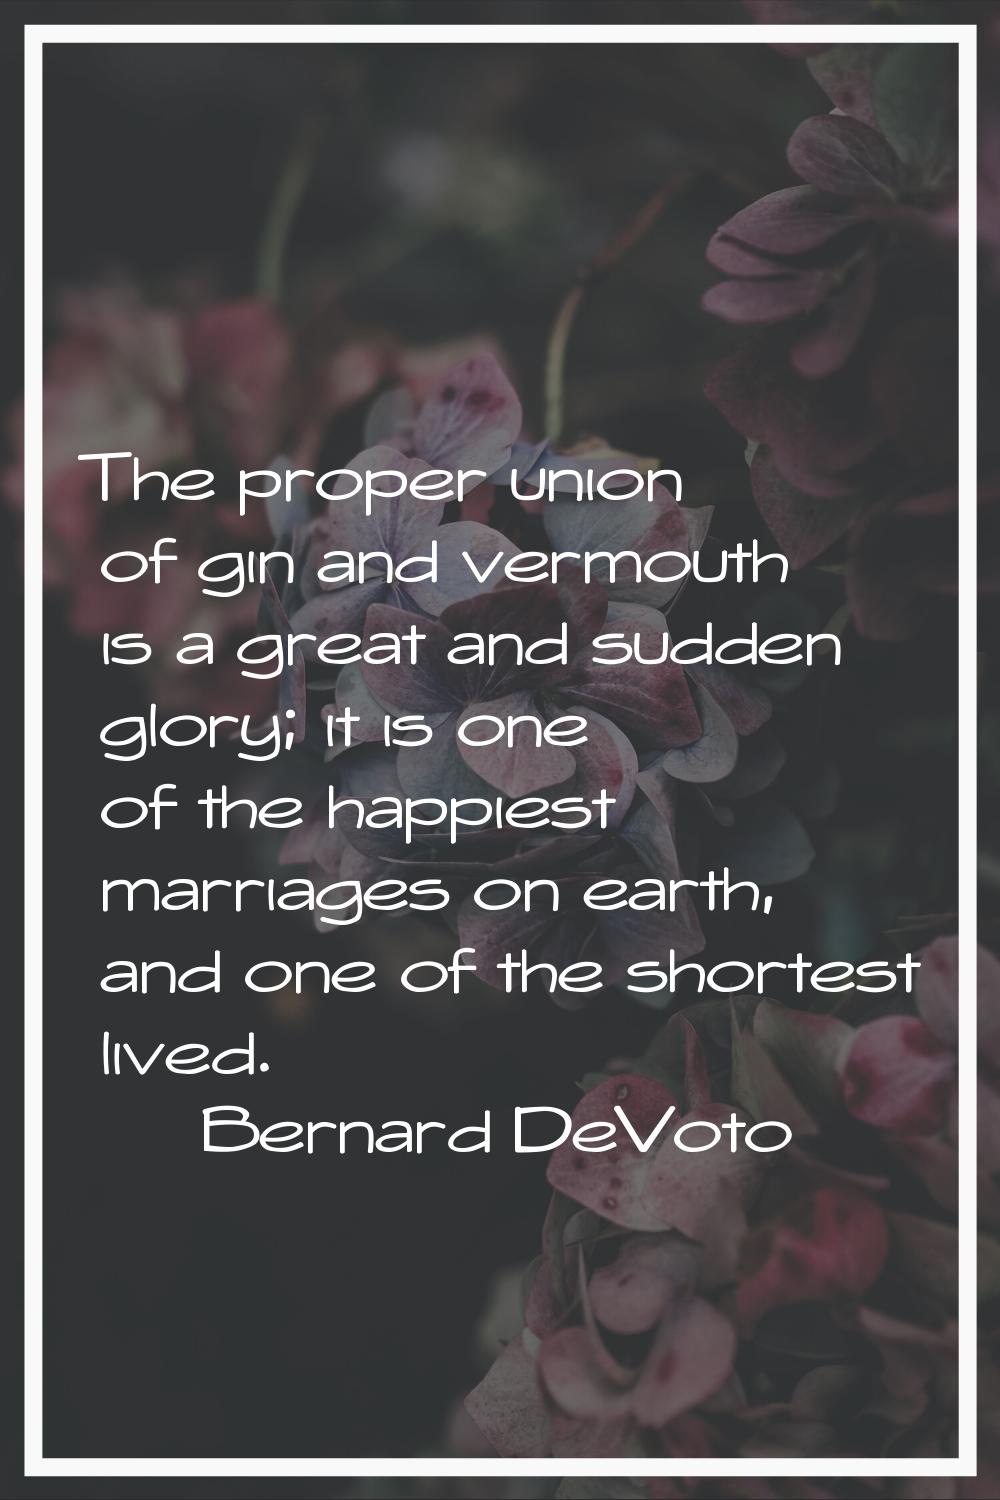 The proper union of gin and vermouth is a great and sudden glory; it is one of the happiest marriag